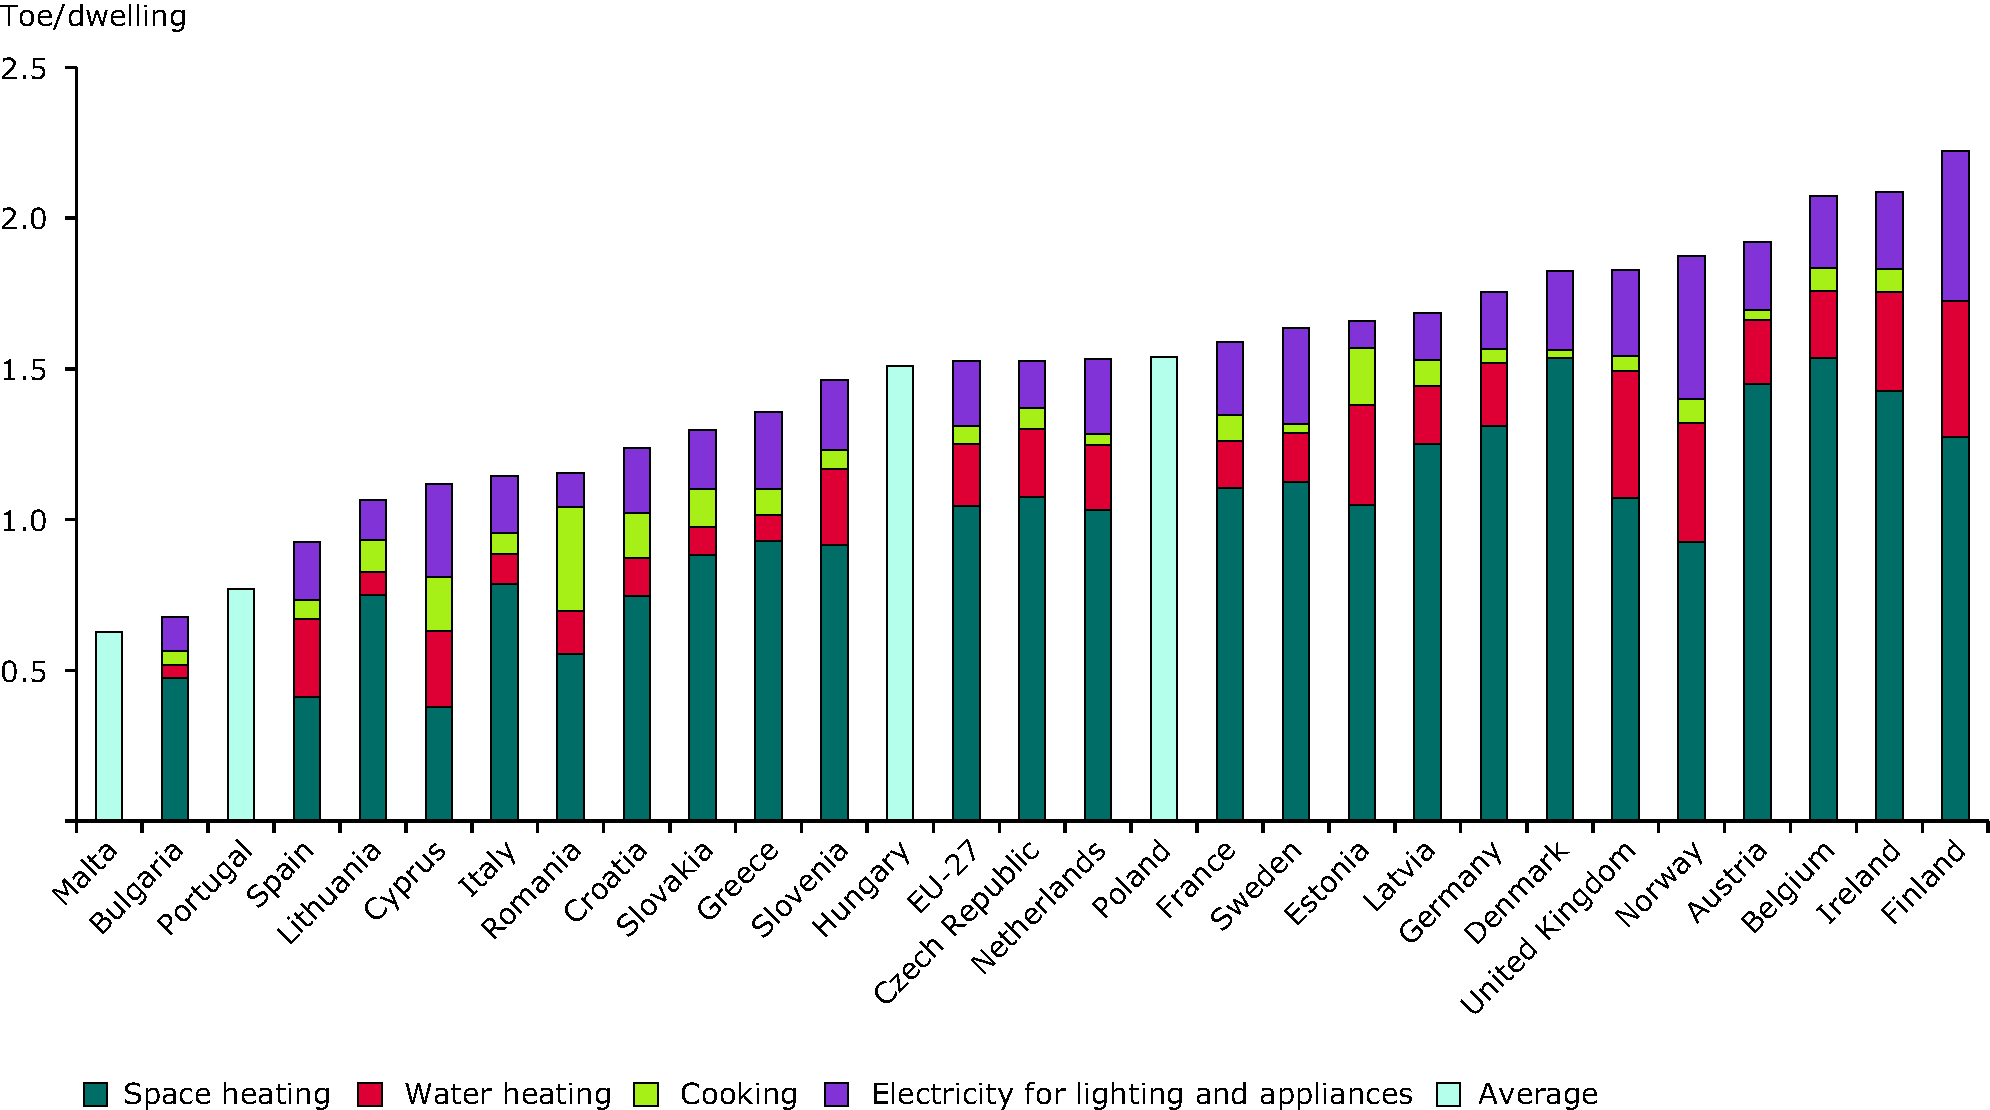 Energy consumption by end uses per dwelling